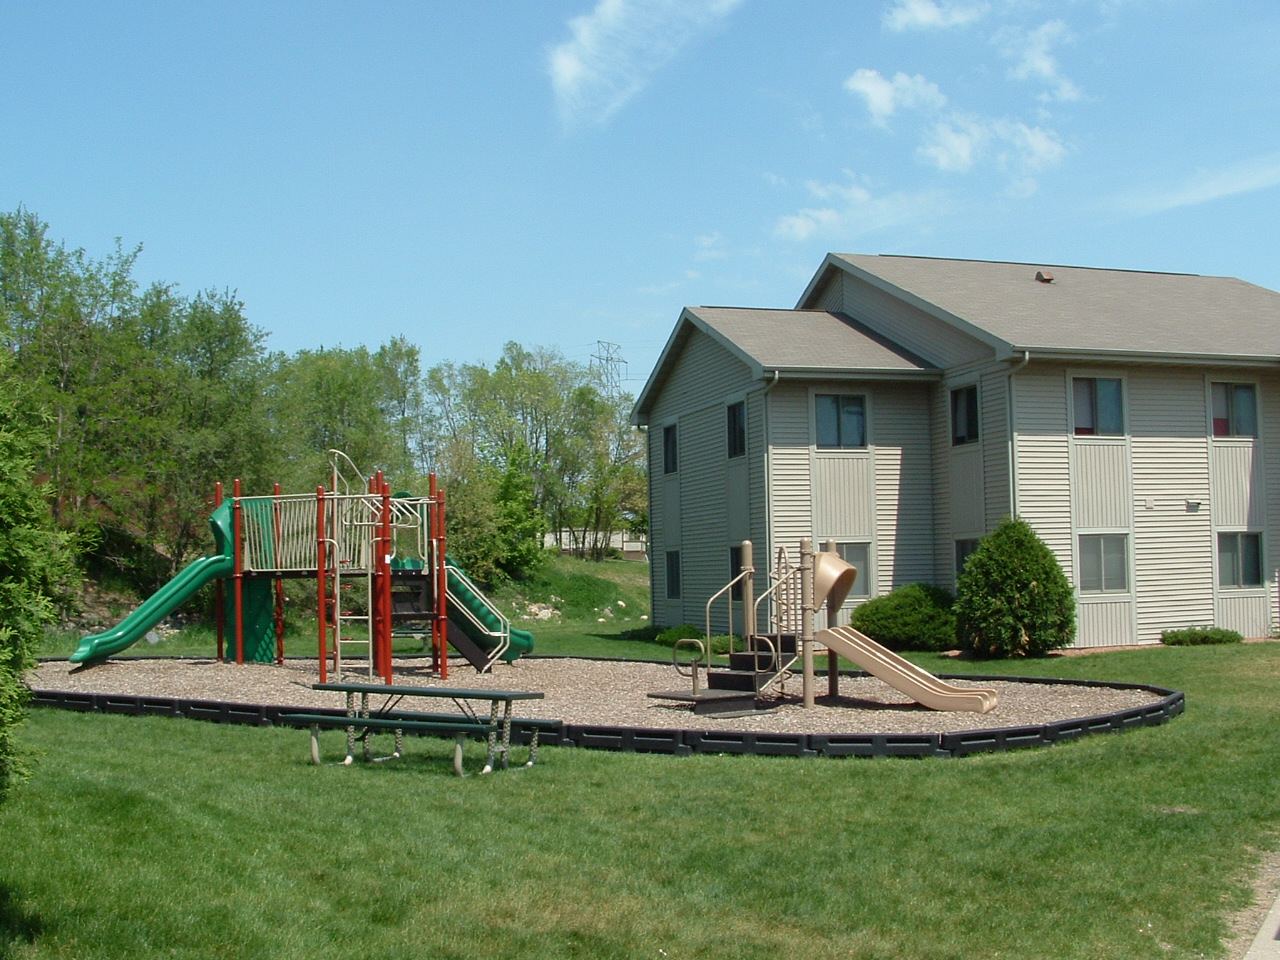 Photo of WALL STREET. Affordable housing located at 2700 W WALL ST JANESVILLE, WI 53548